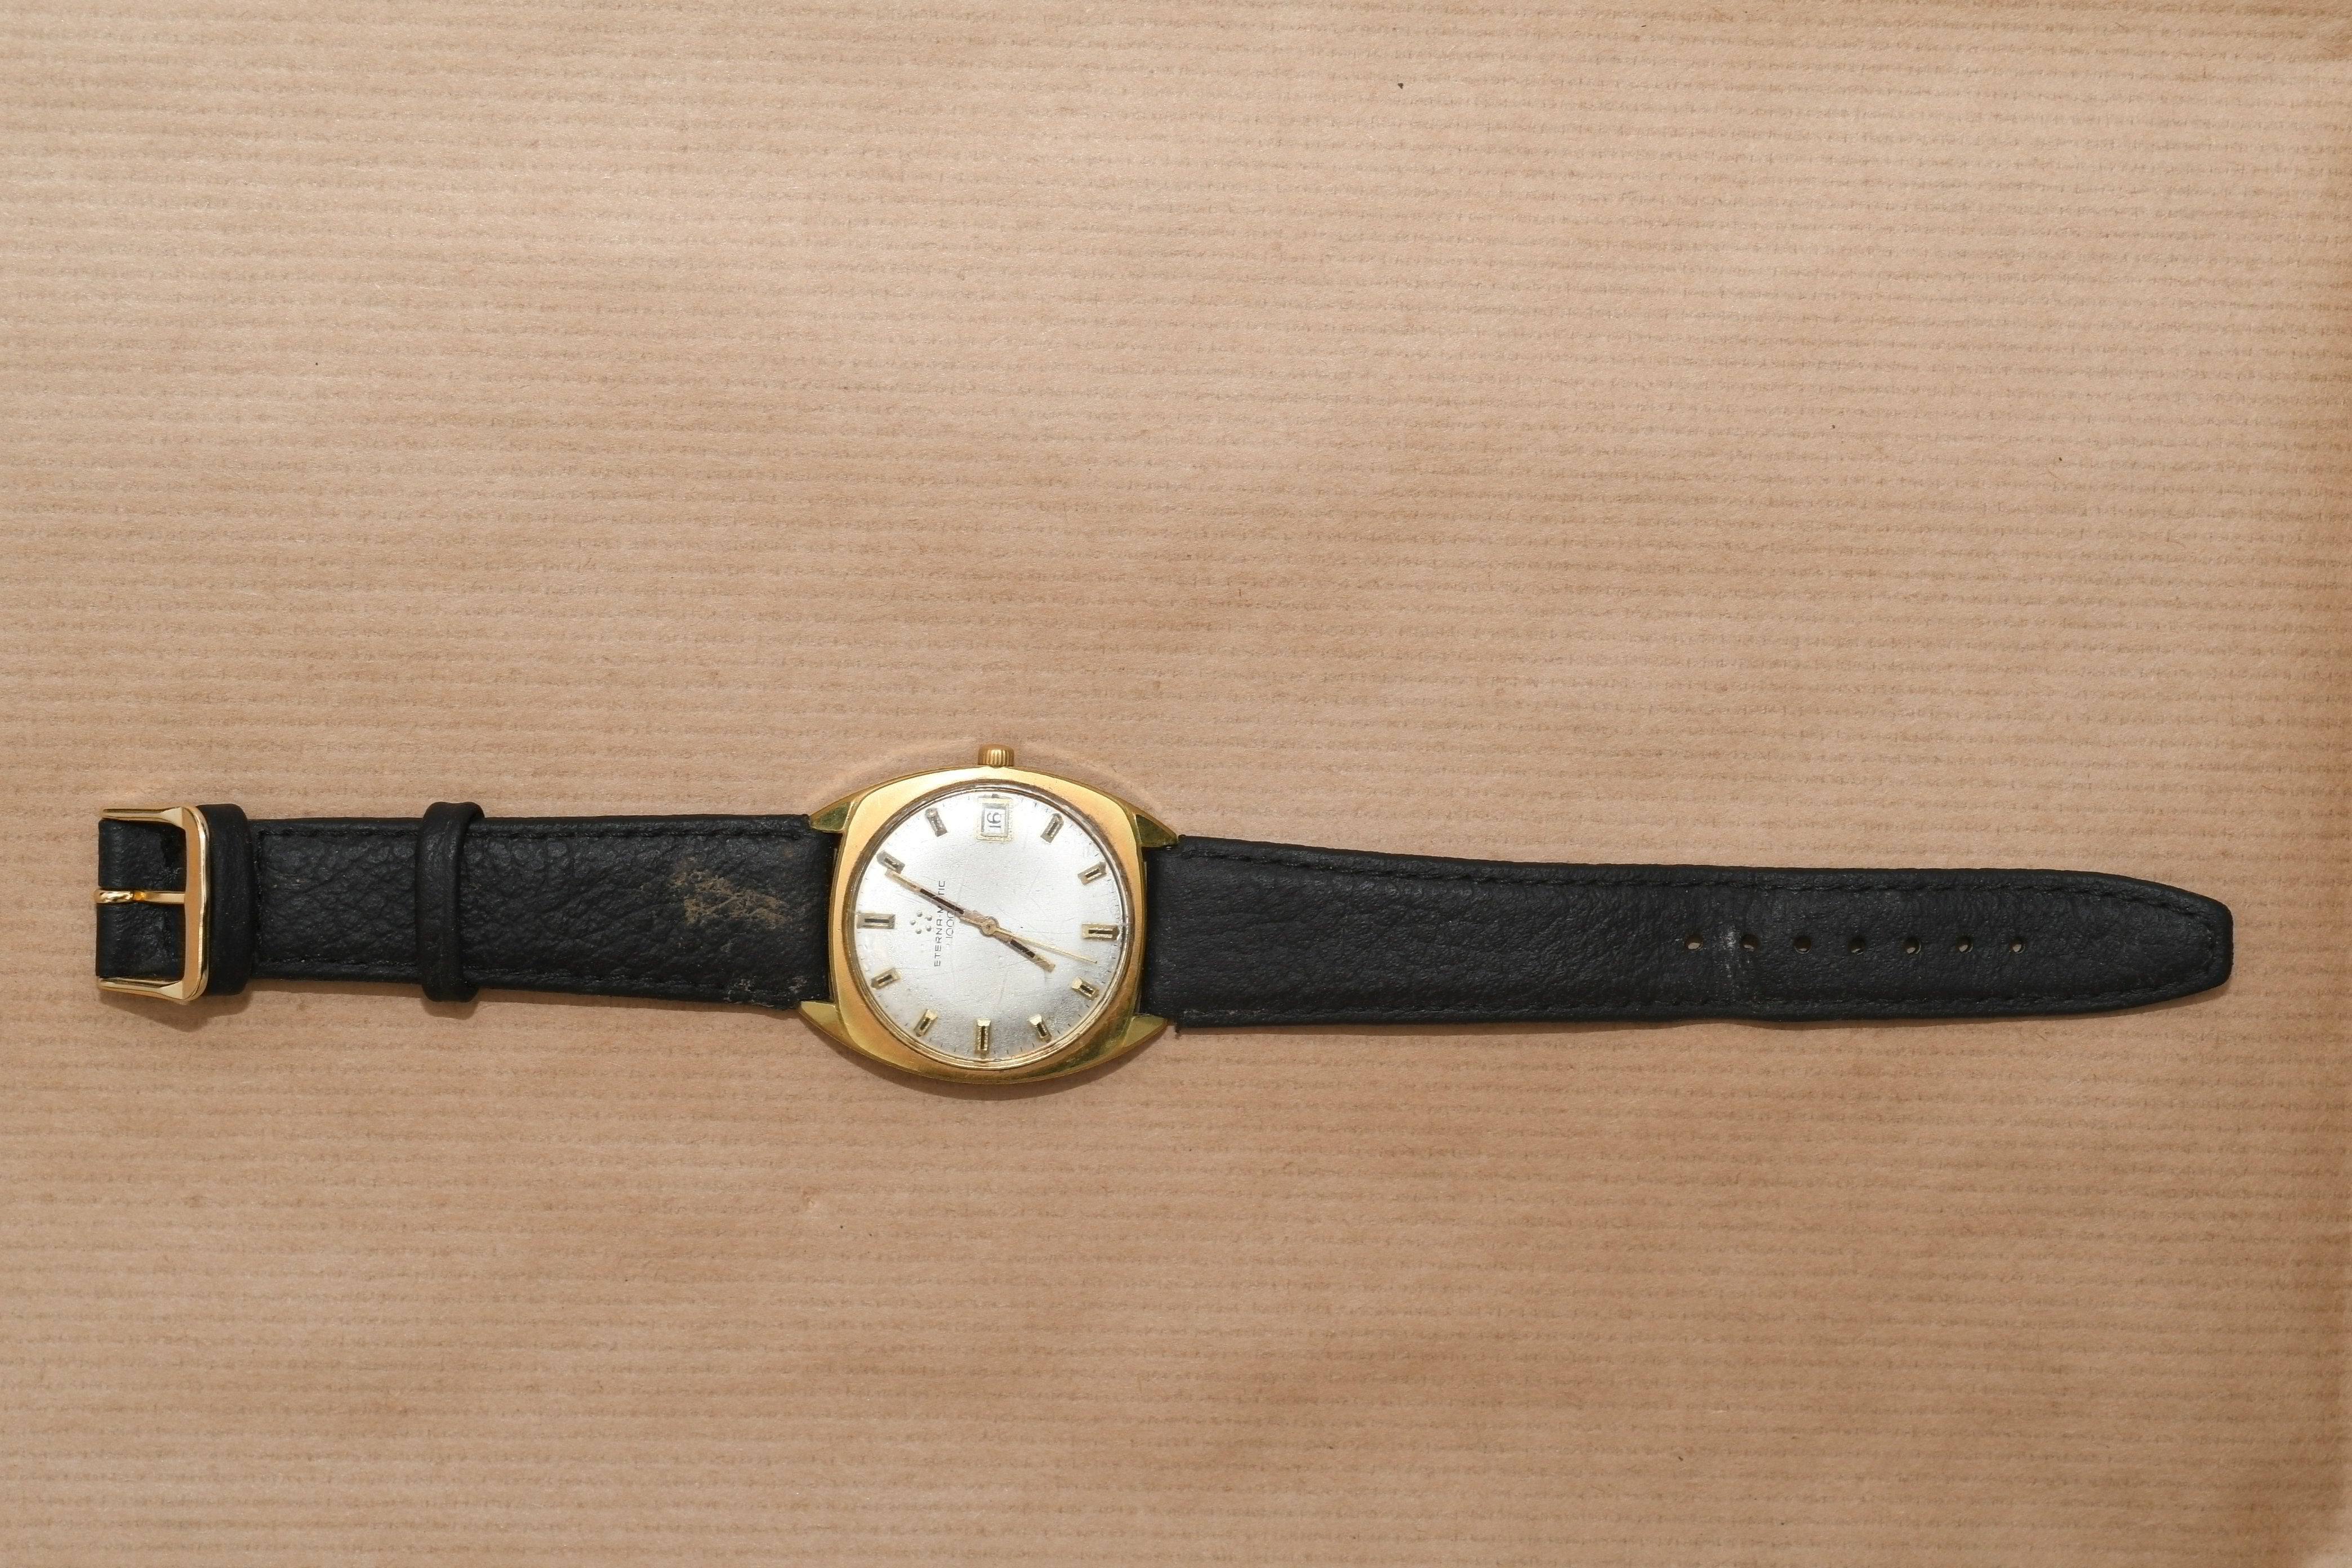 Officers also recovered a gold metal Eterna Matic 1000 wristwatch